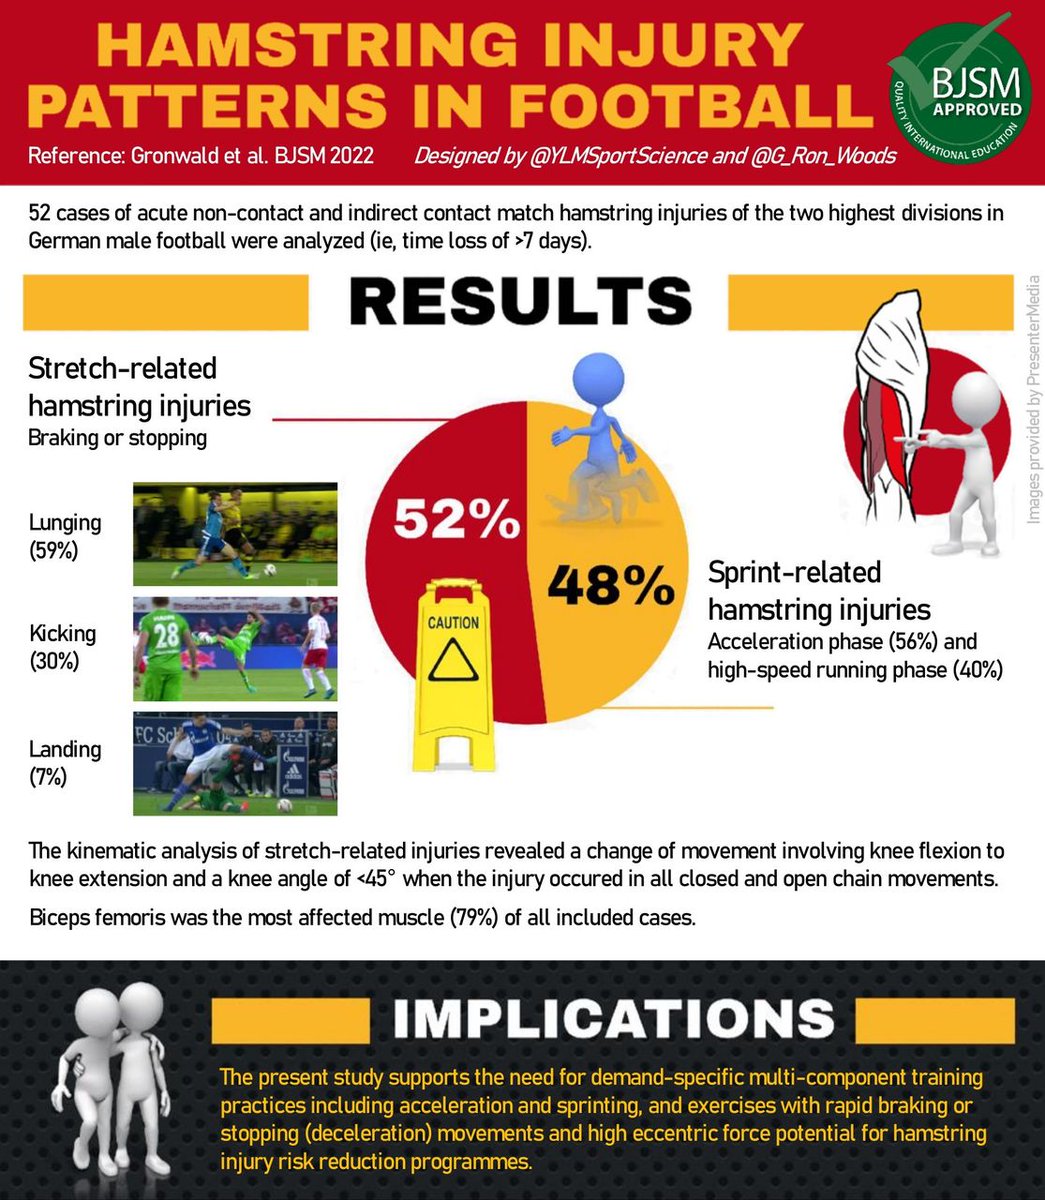 ⚽️ Do you want to learn more about the patterns of hamstring injury in football? ⚽️ Excellent #Infographic 📈 from the #CurrentIssue which summarises findings from a study that used video analysis of injuries 📹 What are the important implications? 👉 bit.ly/3CyhDk7